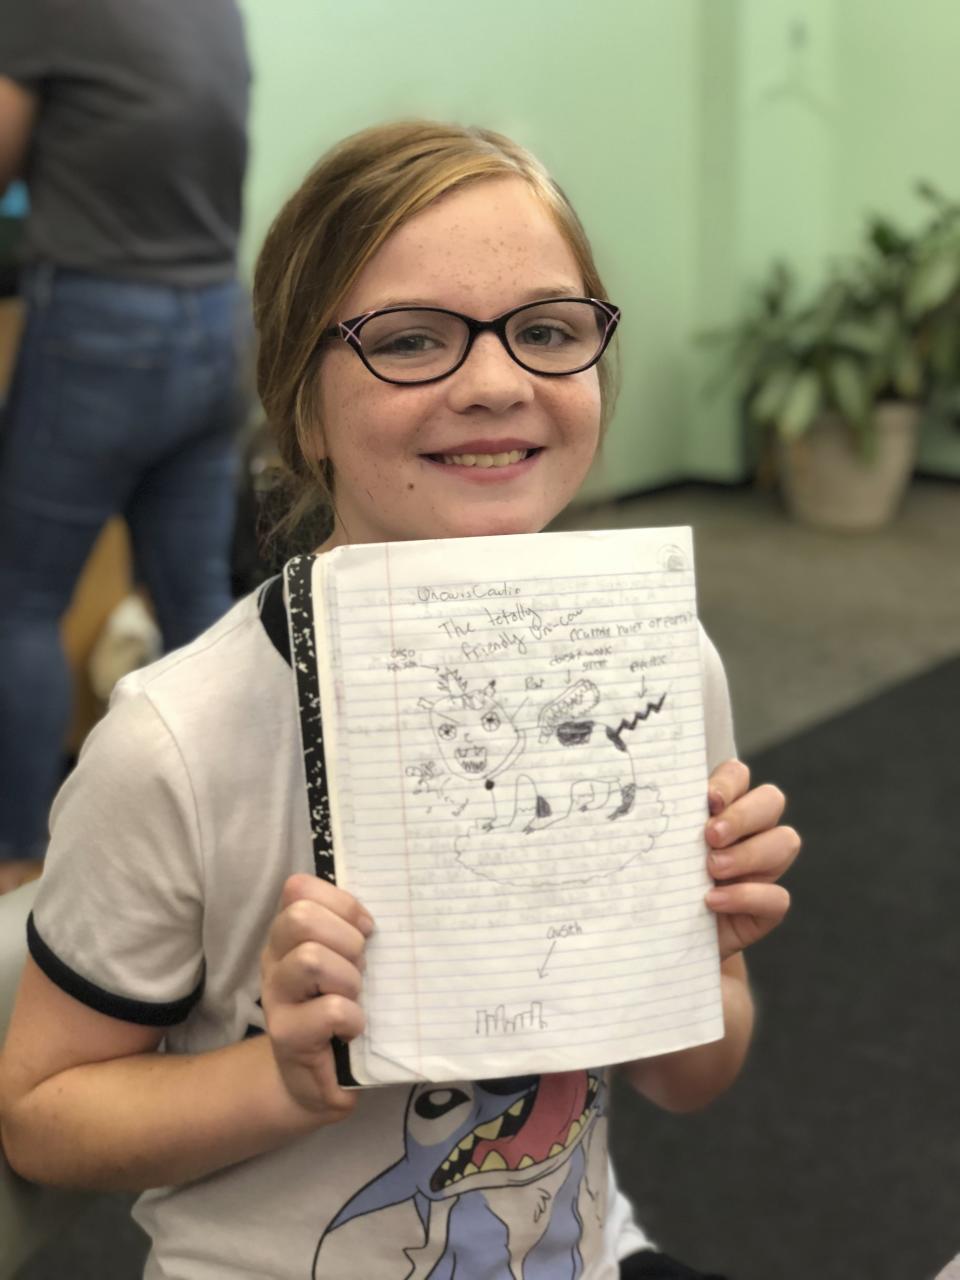 In this June 8th, 2018 photo provided by Syed Ali Haider, 10-year-old Genevieve Thiel shows off her work during Austin Bat Cave's week-long Magical Realism summer camp in Austin, Texas. Educators say teaching critical and creative writing is just as important as strong reading and is too often overlooked. "When students own their voices and tell their stories, they become not only stronger and more confident writers, but also stronger and more confident individuals," says Ali Haider, executive director of Bat Cave, the Austin-based creative writing center. (Syed Ali Haider via AP)